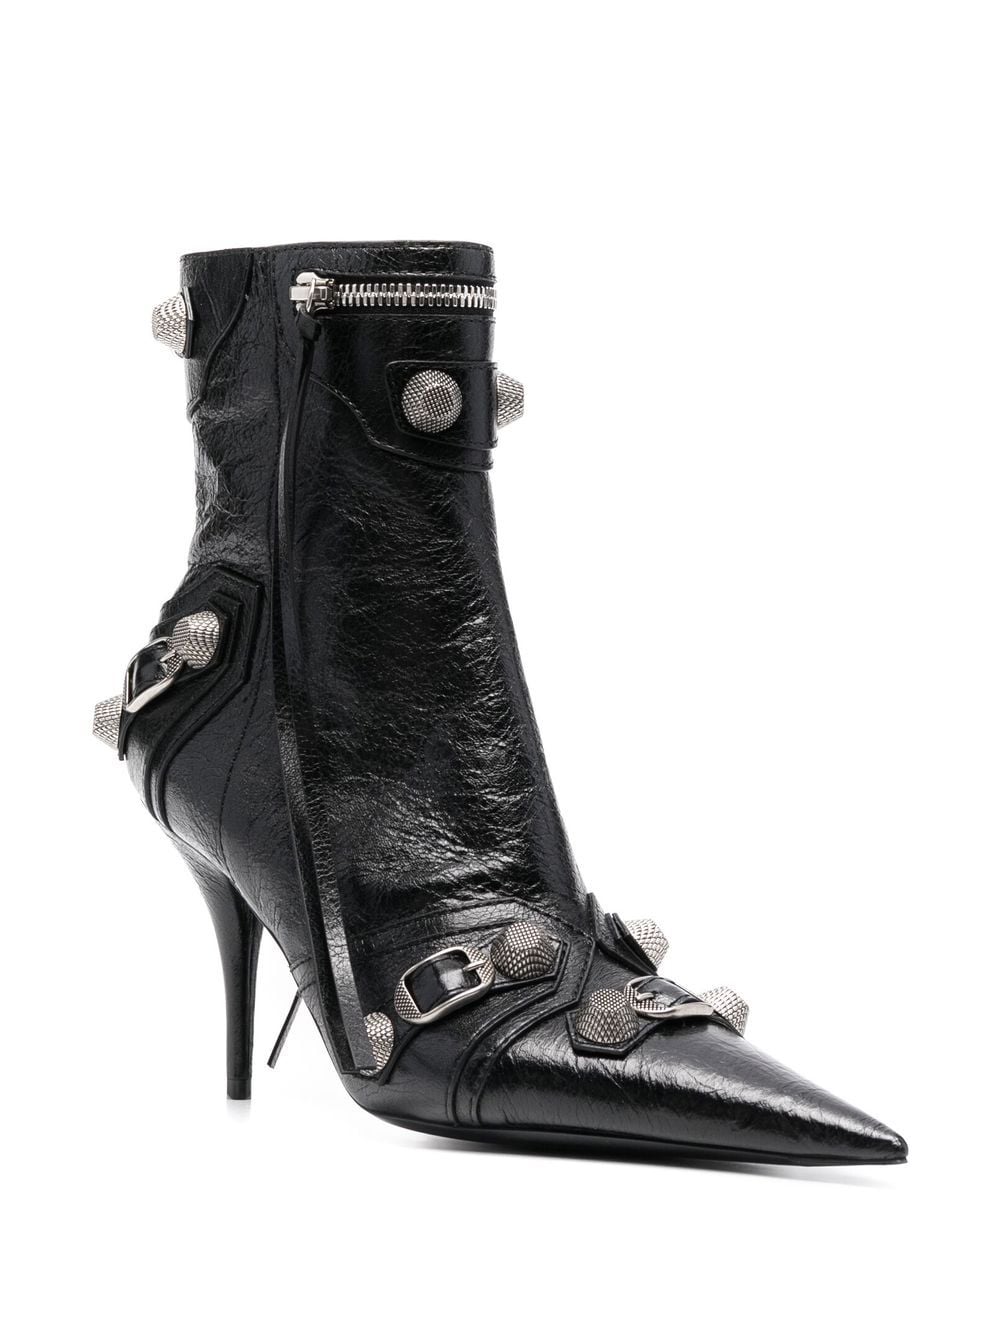 Women's Black Pointed Toe Leather Ankle Boots with Stud, Tassel, and Zip Detailing